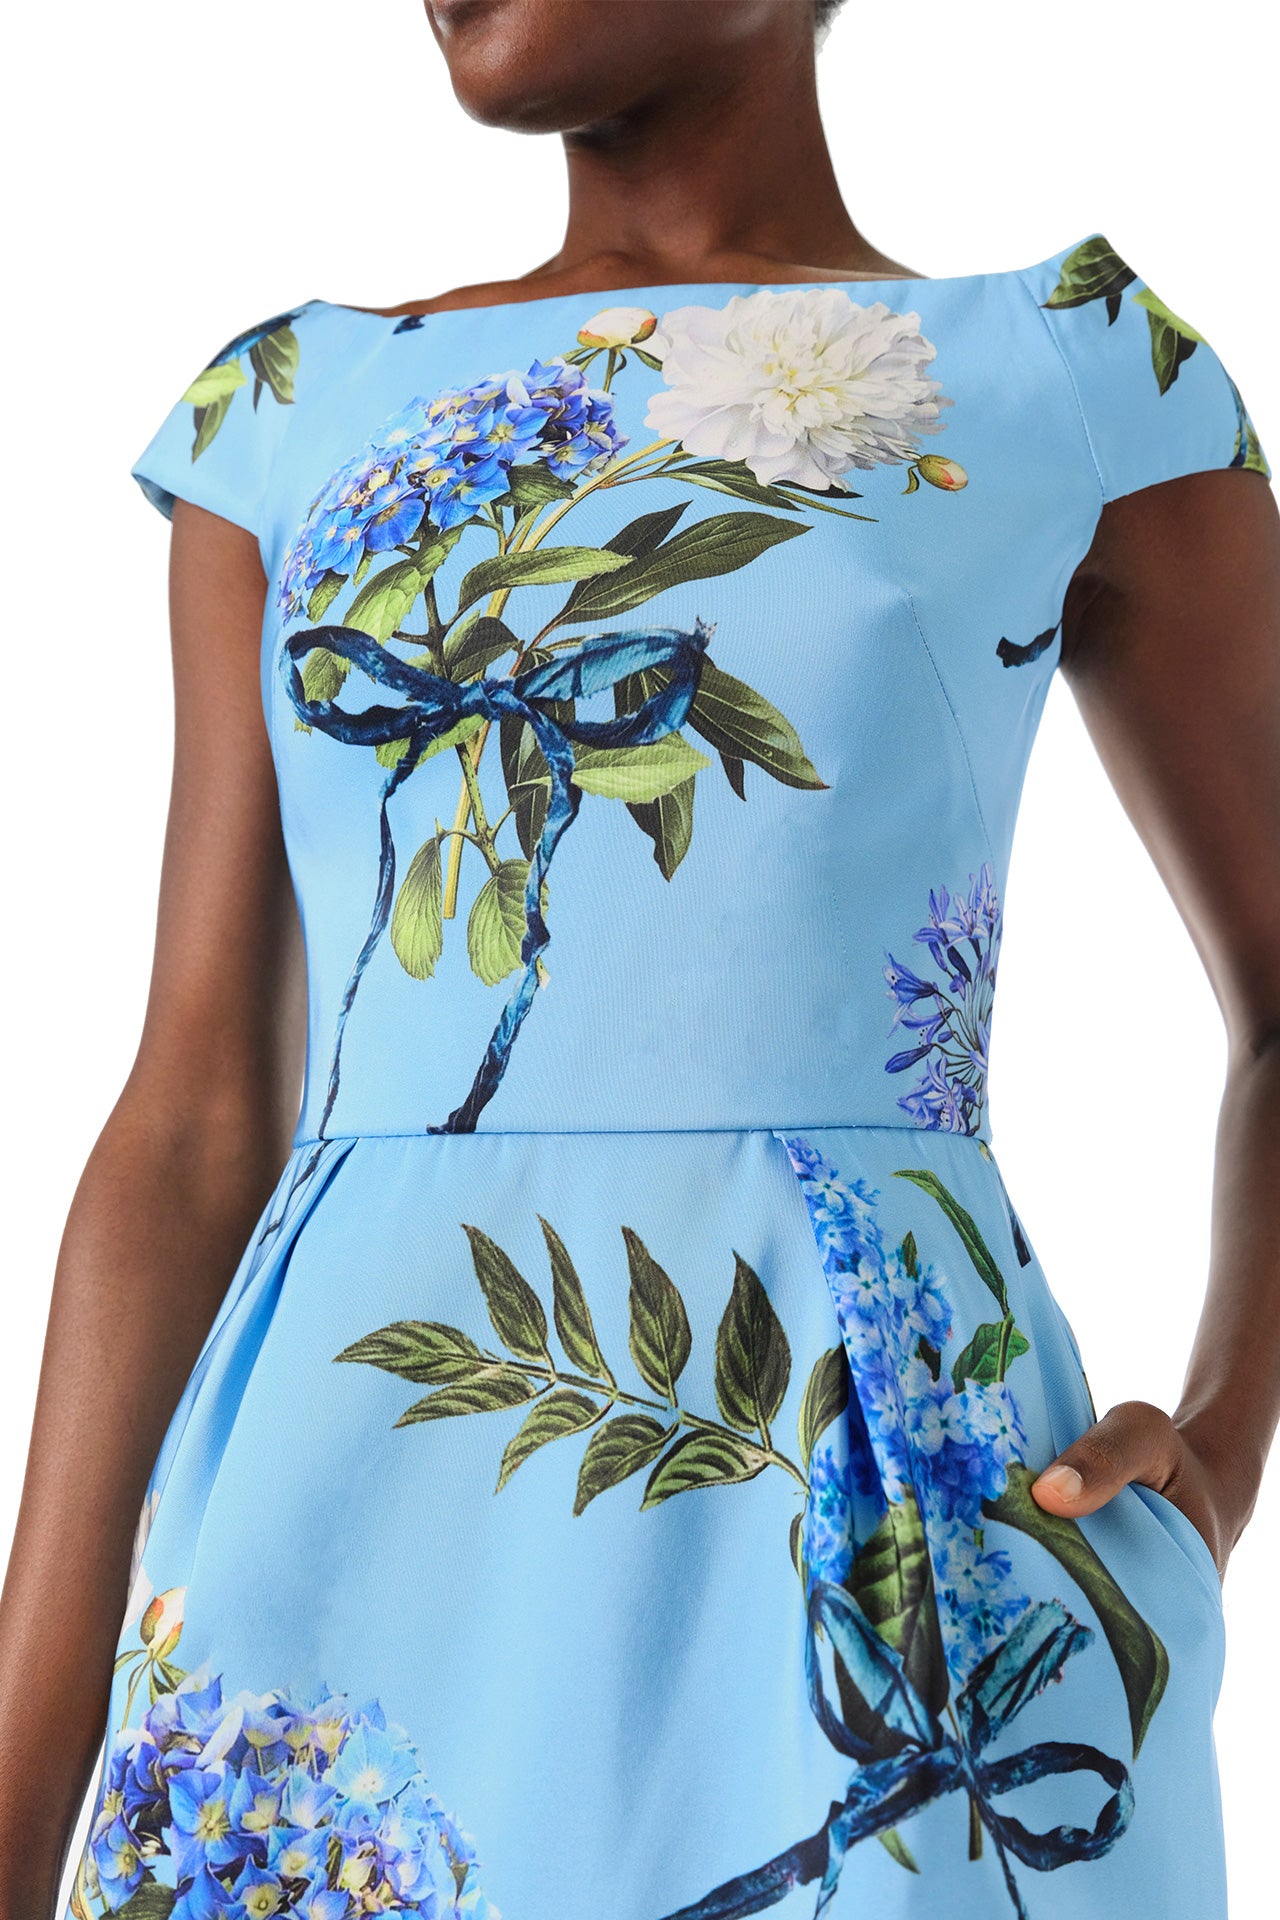 Monique Lhuillier Spring 2024 column gown with bateau neckline, cap sleeves and pockets in Sky Blue Hydrangea printed silk faille - fabric.